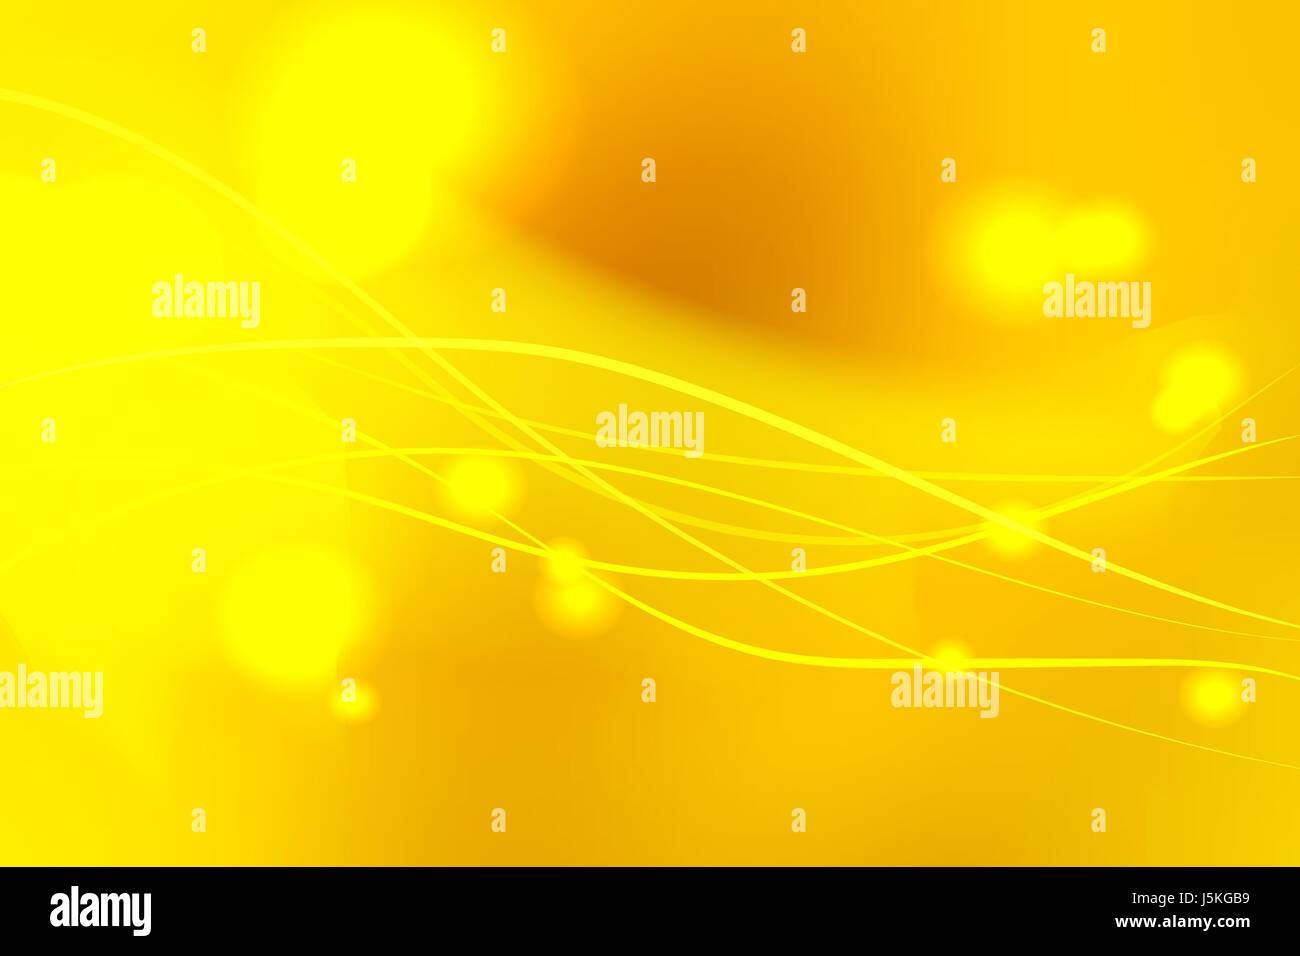 Yellow shades abstract blurred vector background with light lines Stock Vector